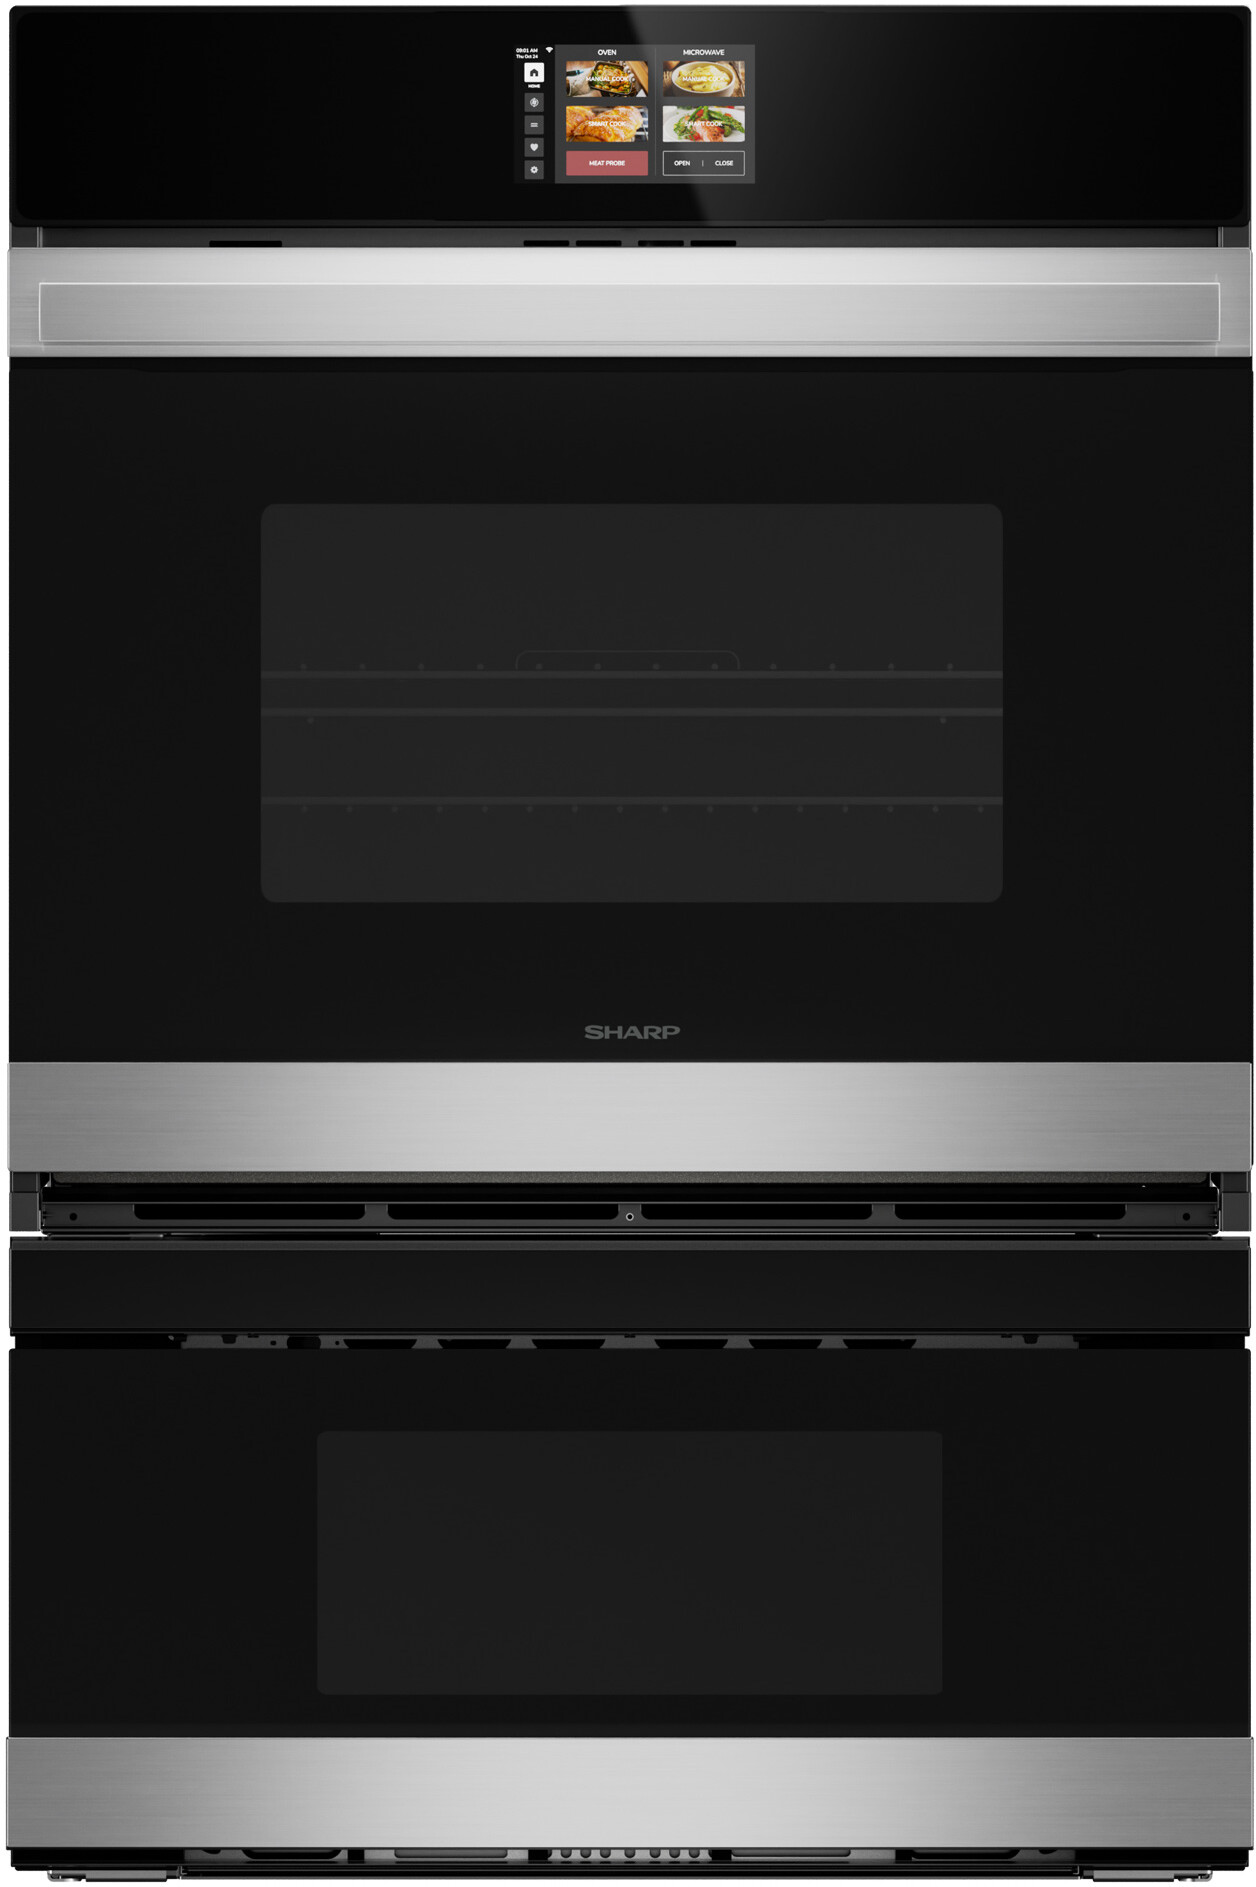 30"" Double Electric Combination Wall Oven - Sharp SWB3085HS